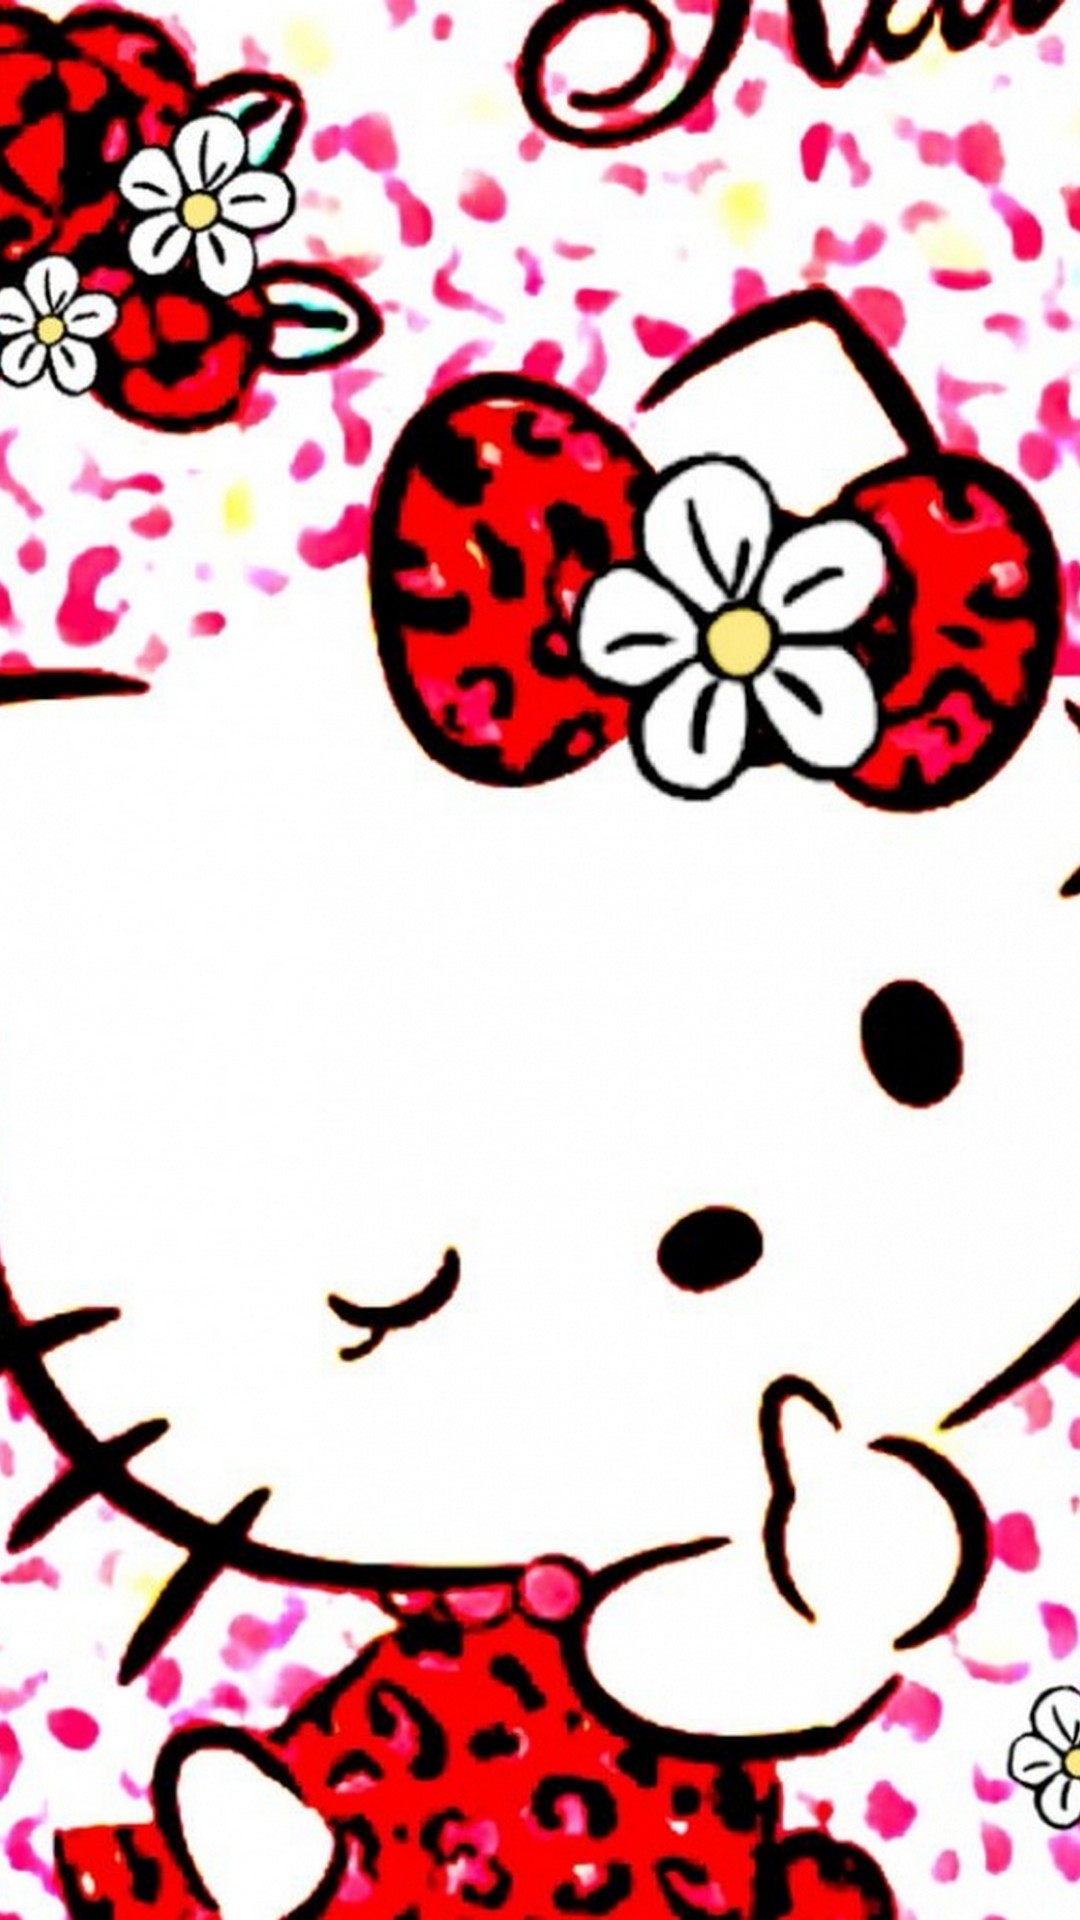 Free download Wallpaper Hello Kitty Images iPhone 2020 3D iPhone Wallpaper [1080x1920] for your